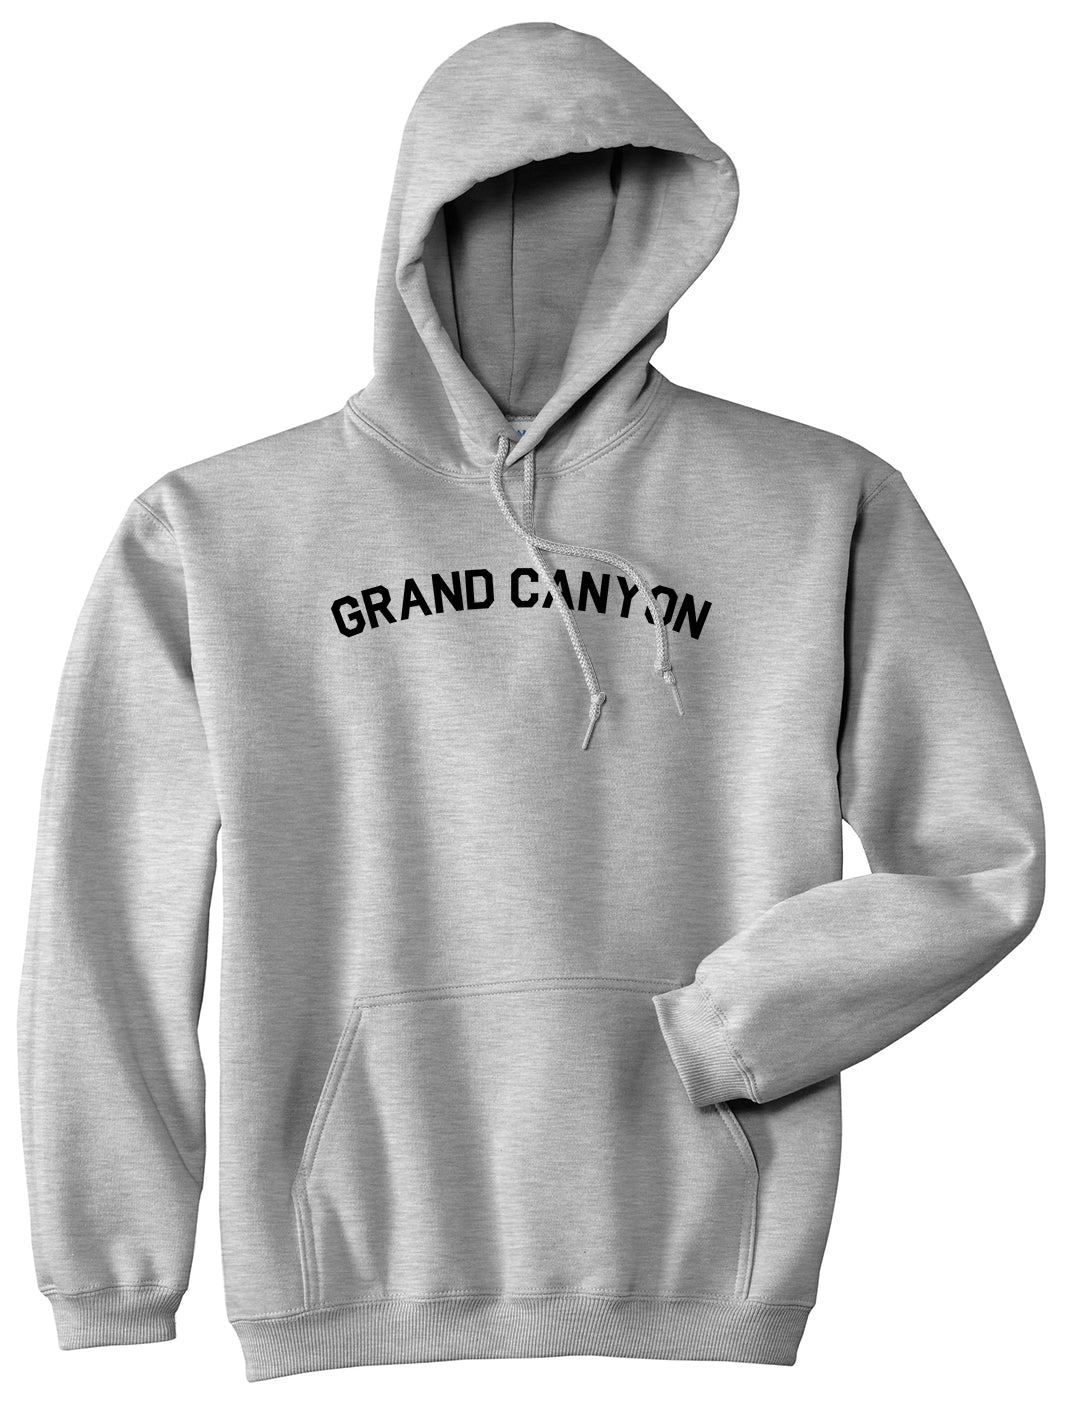 Grand Canyon Mens Grey Pullover Hoodie by KINGS OF NY